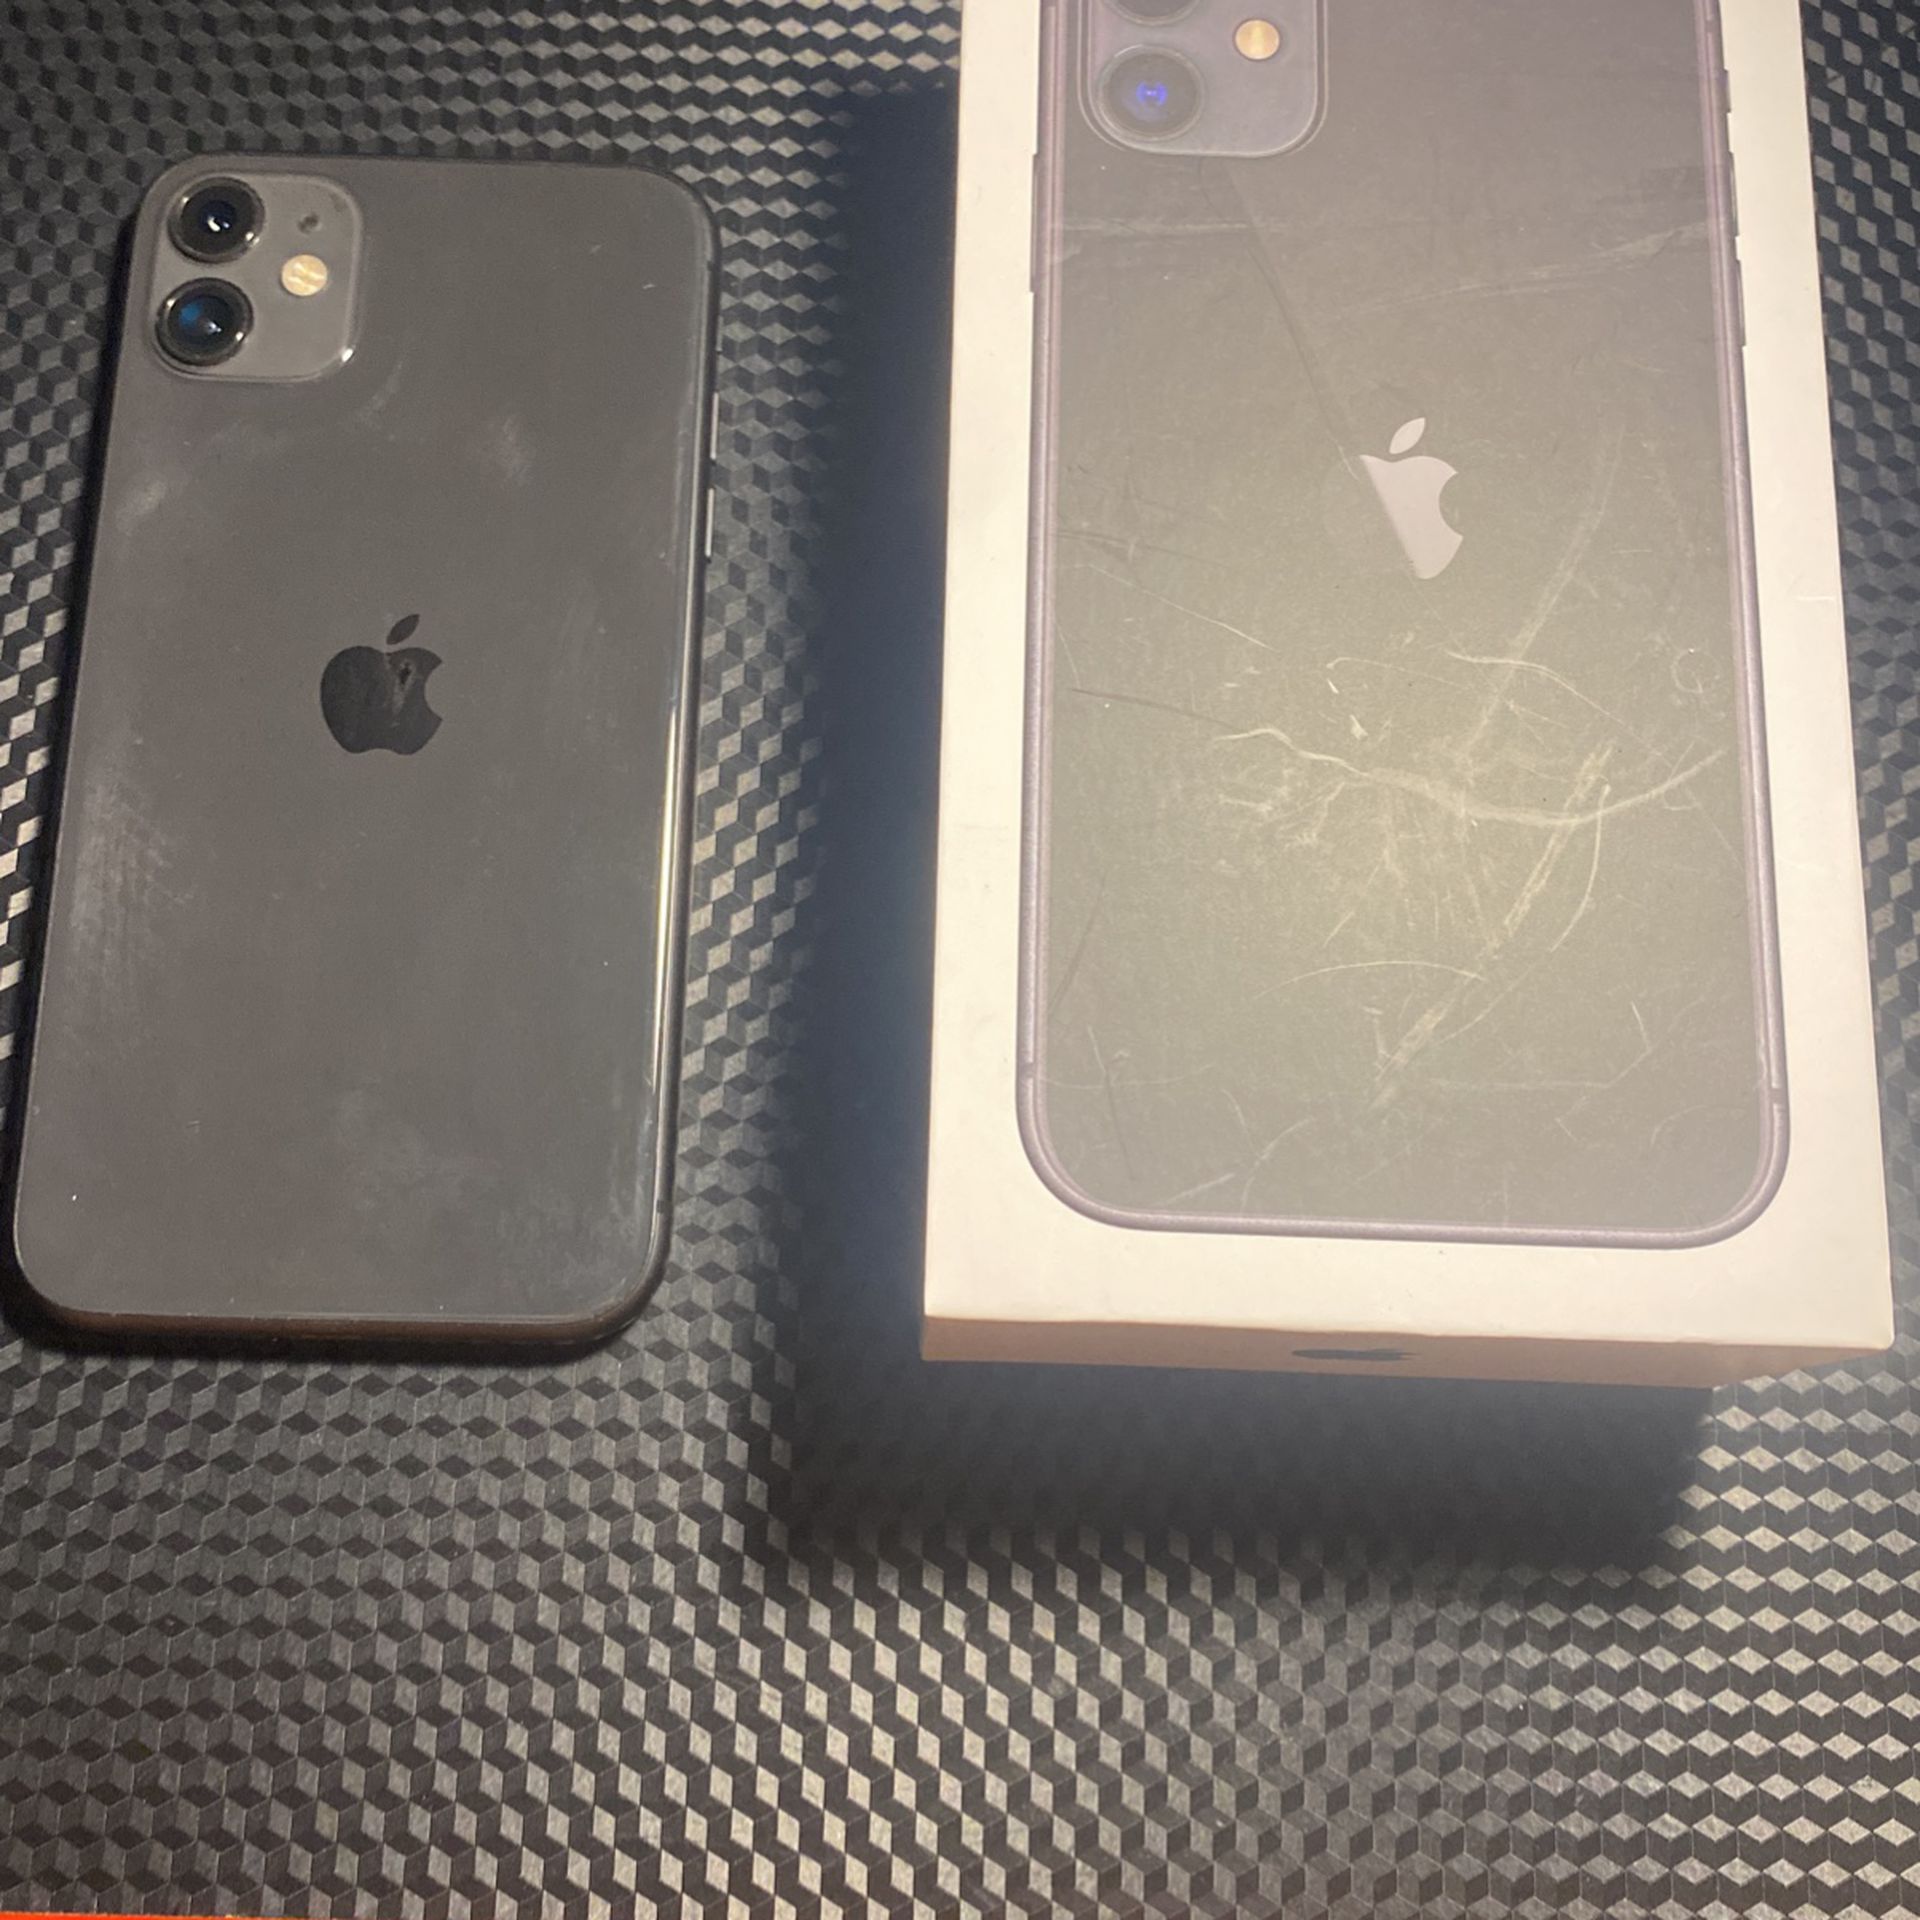 IPhone 11 (Needs To Be Fixed)